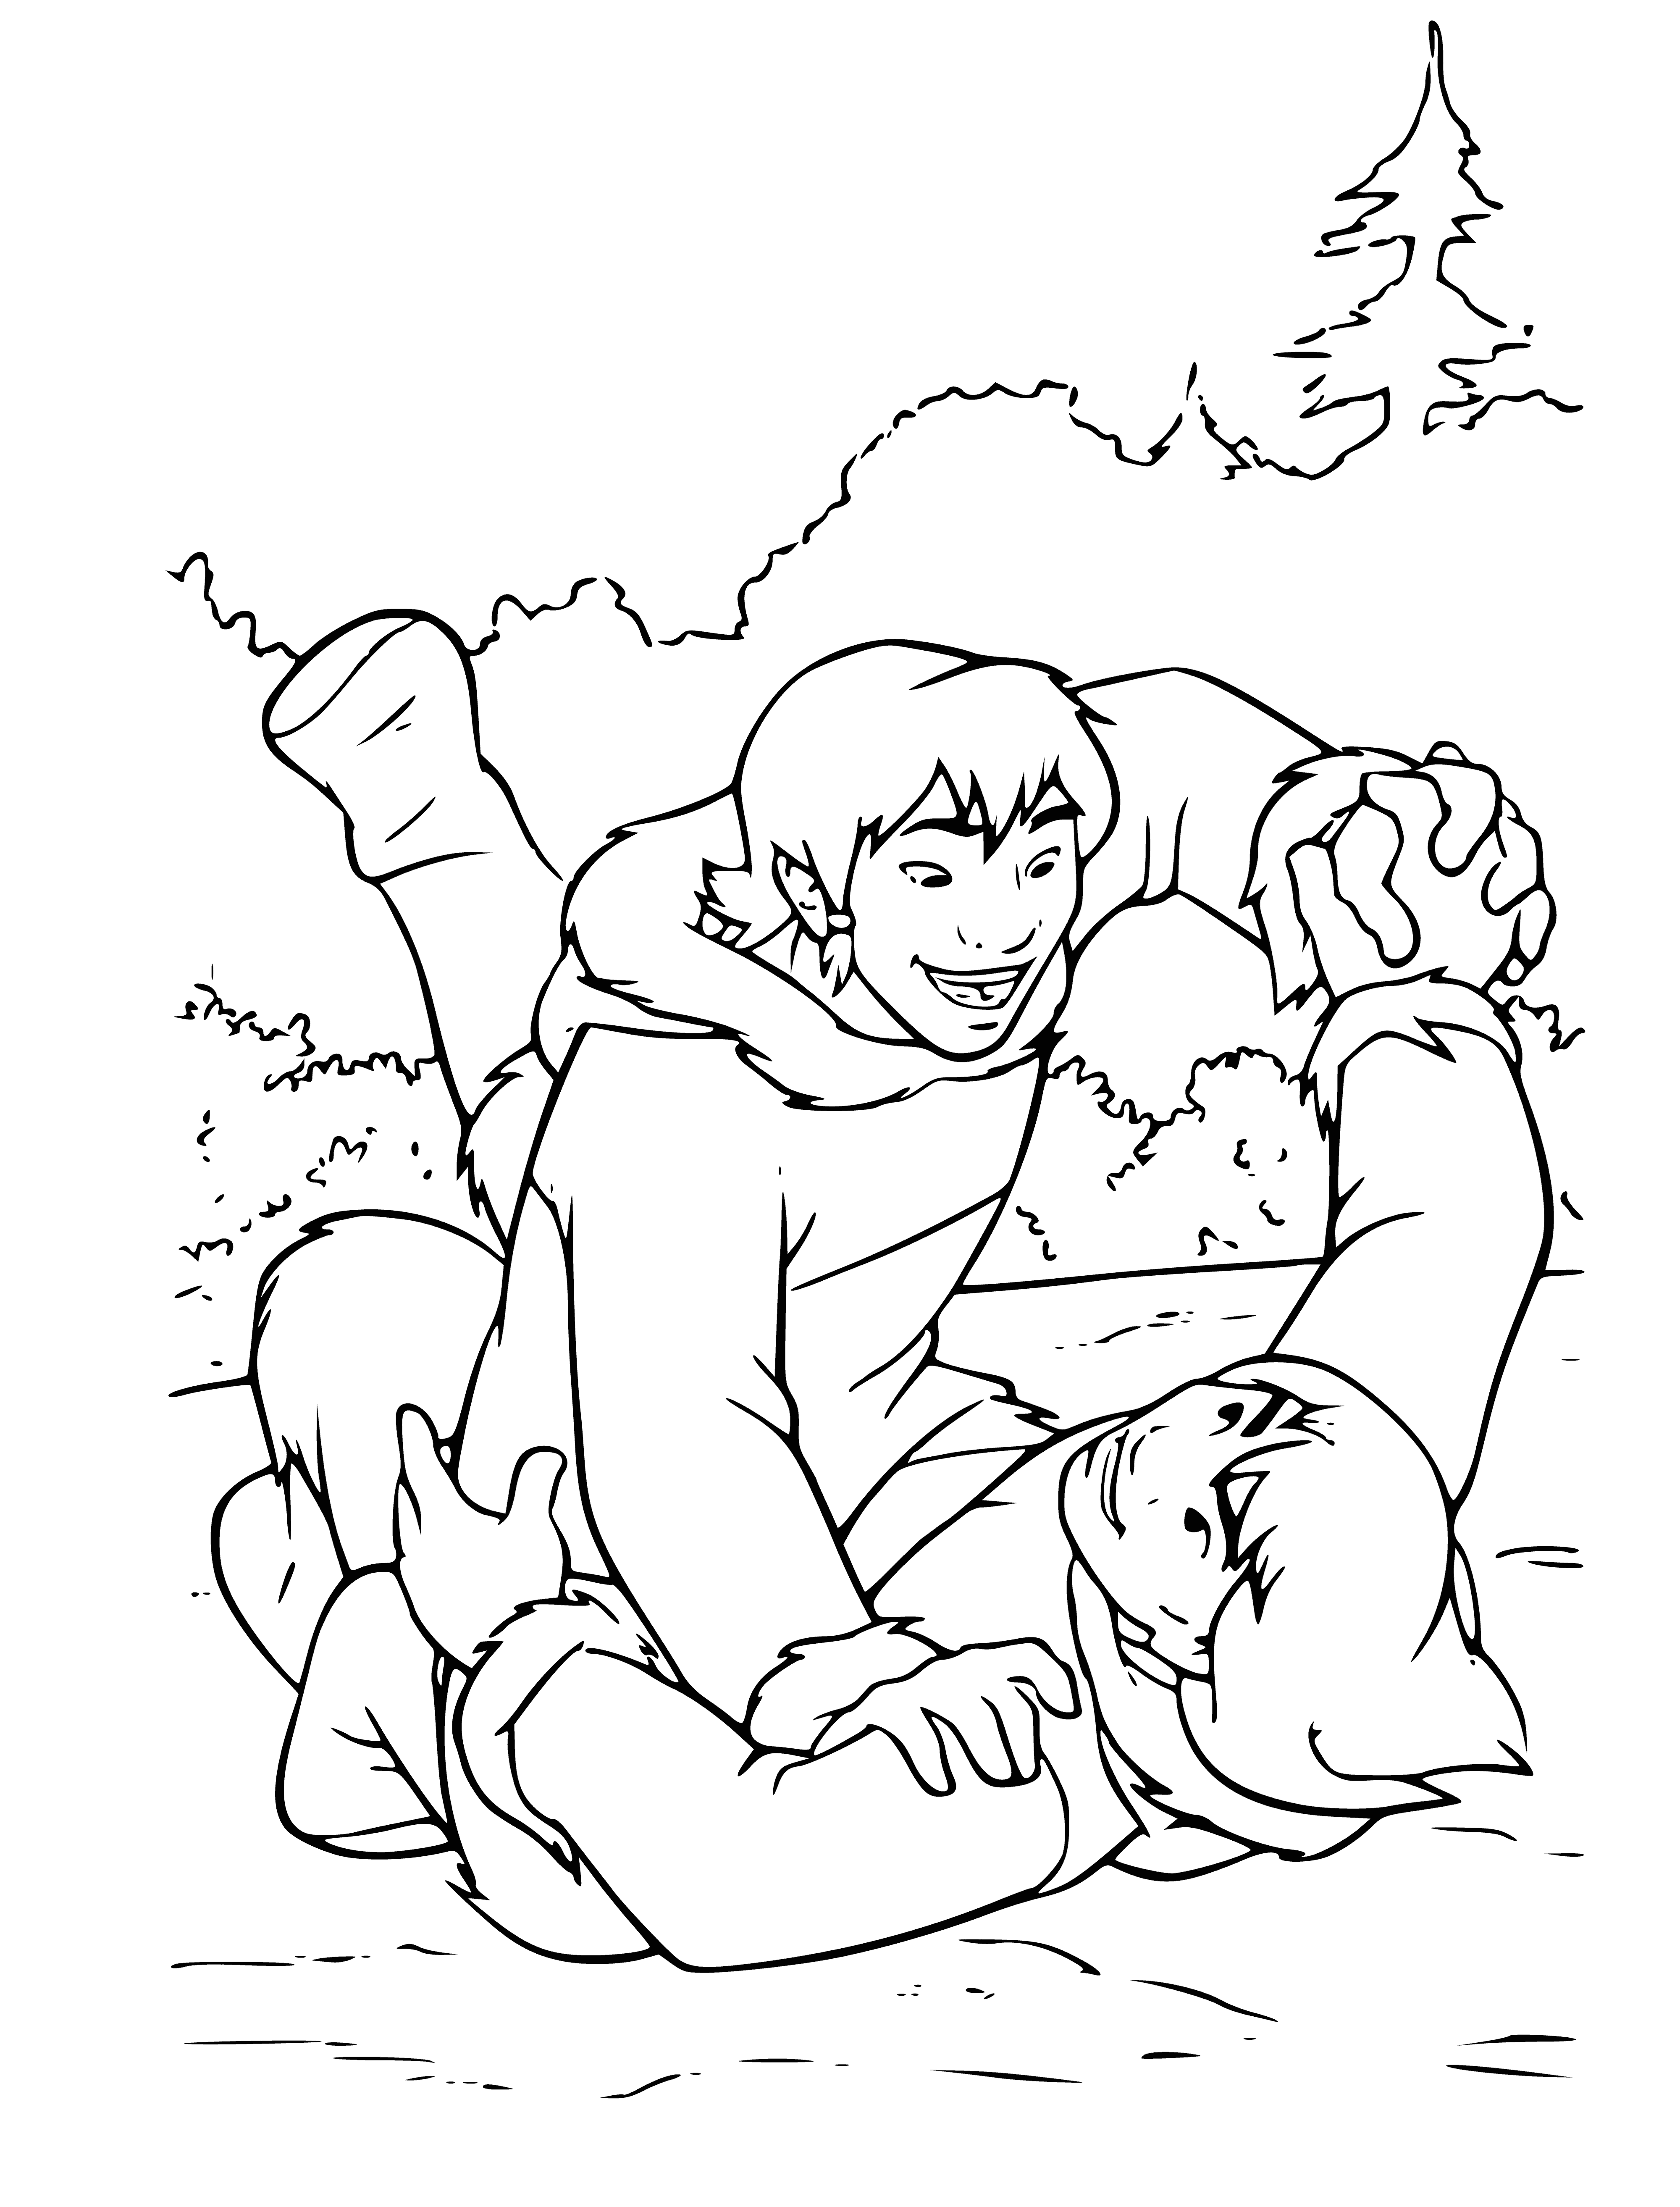 coloring page: Two brothers fight; mom looks on sadly.